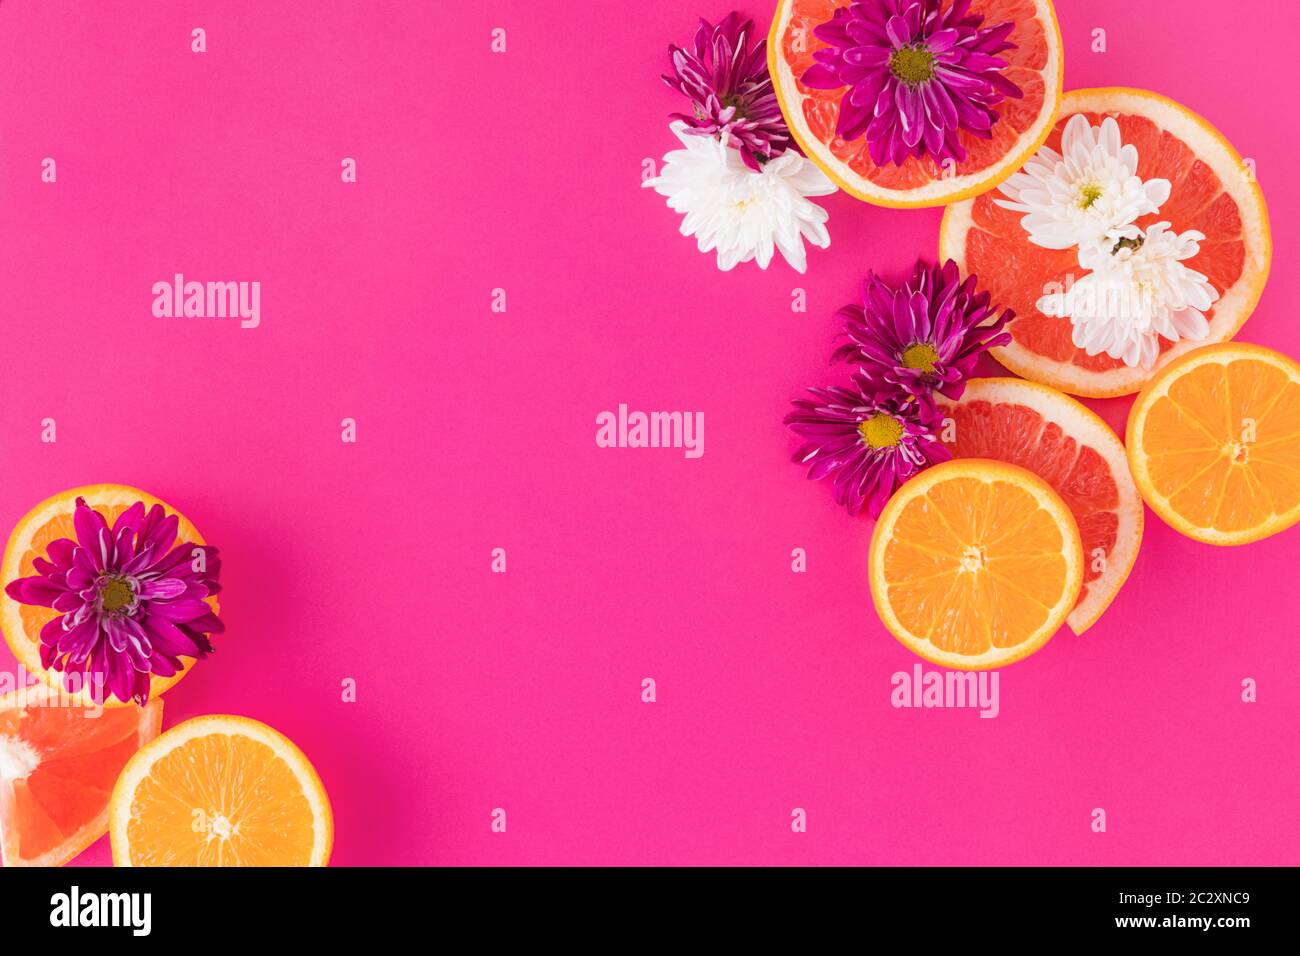 Citrus fruits with purple flowers in a fucsia background Stock Photo